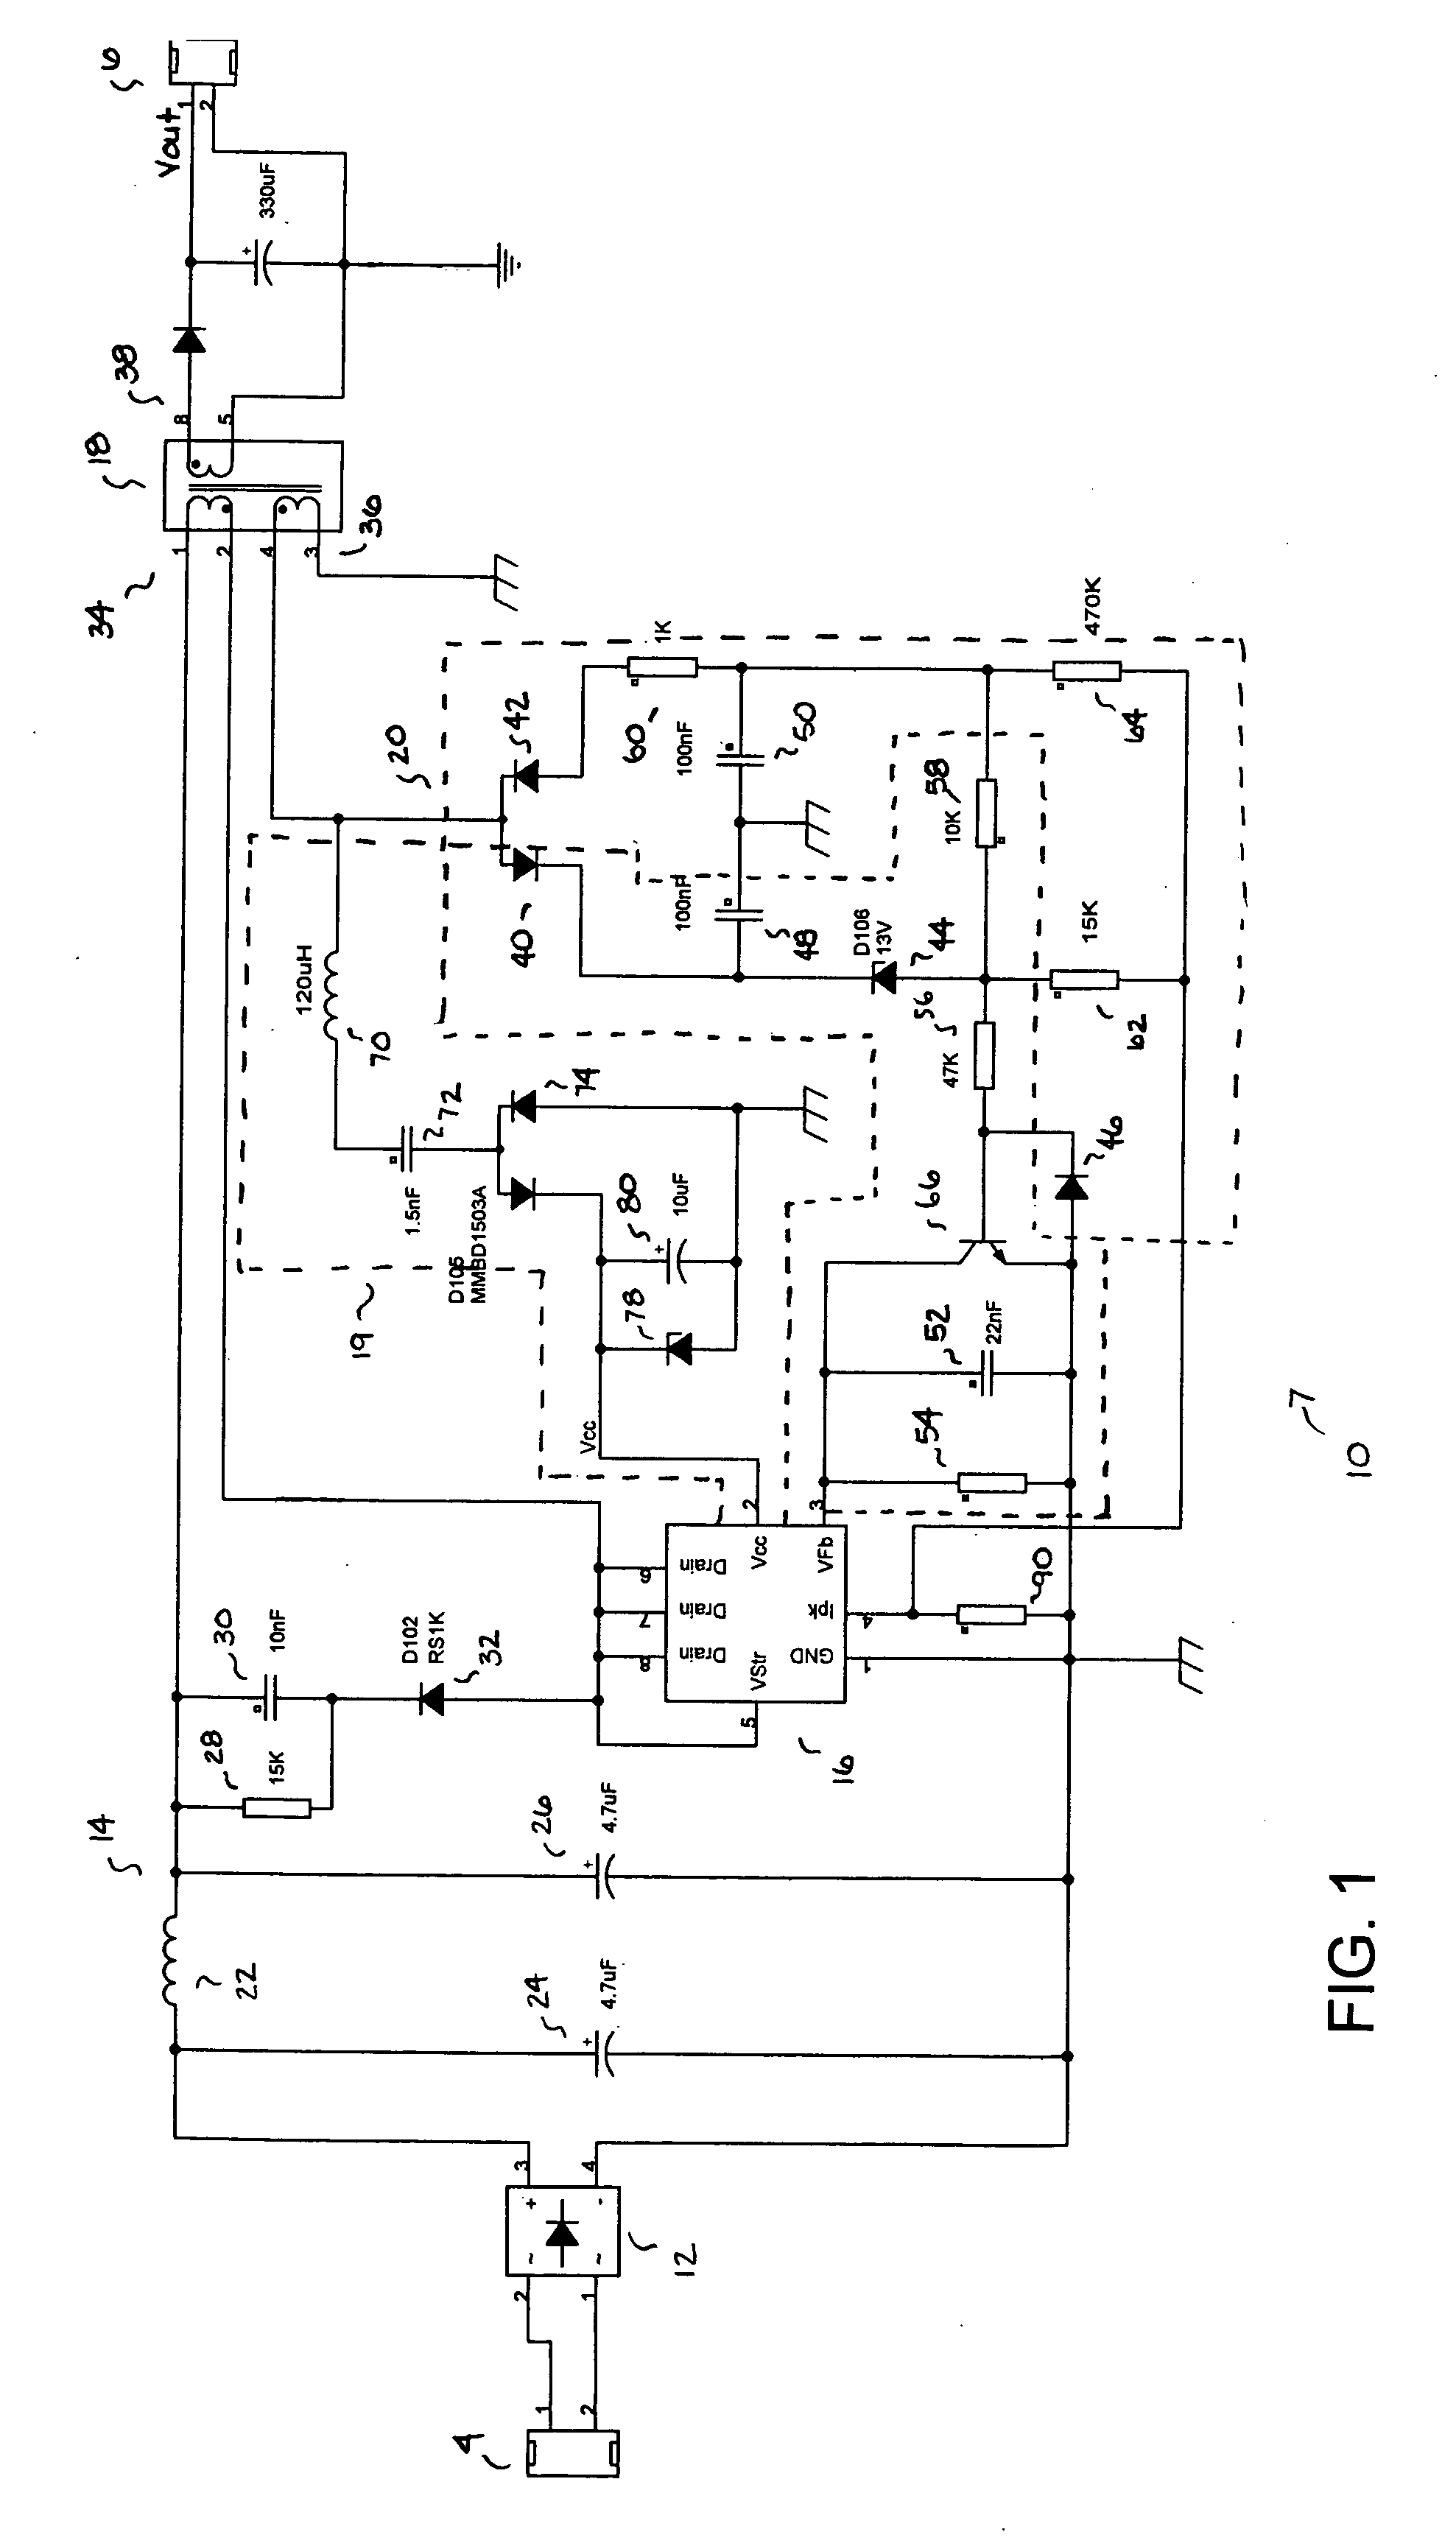 Primary side regulated power supply system with constant current output